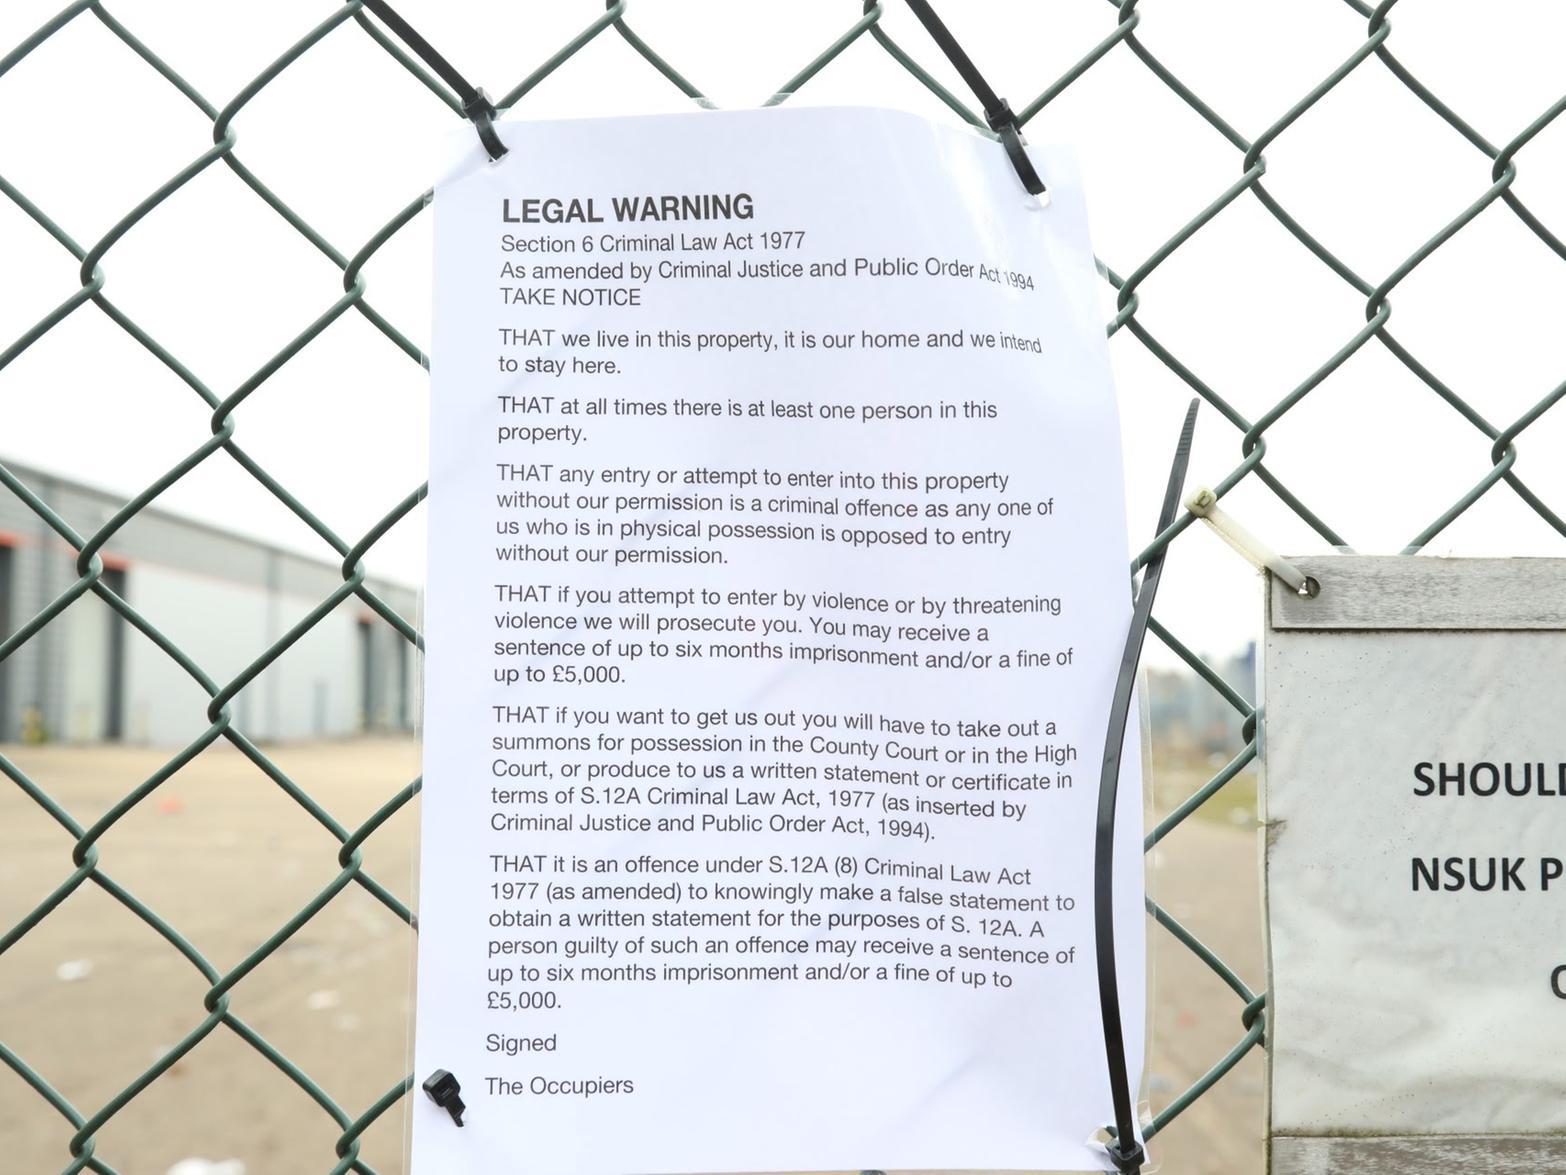 A legal notice claiming squatters' rights was tied to the fence. Pictures by Alison Bagley.